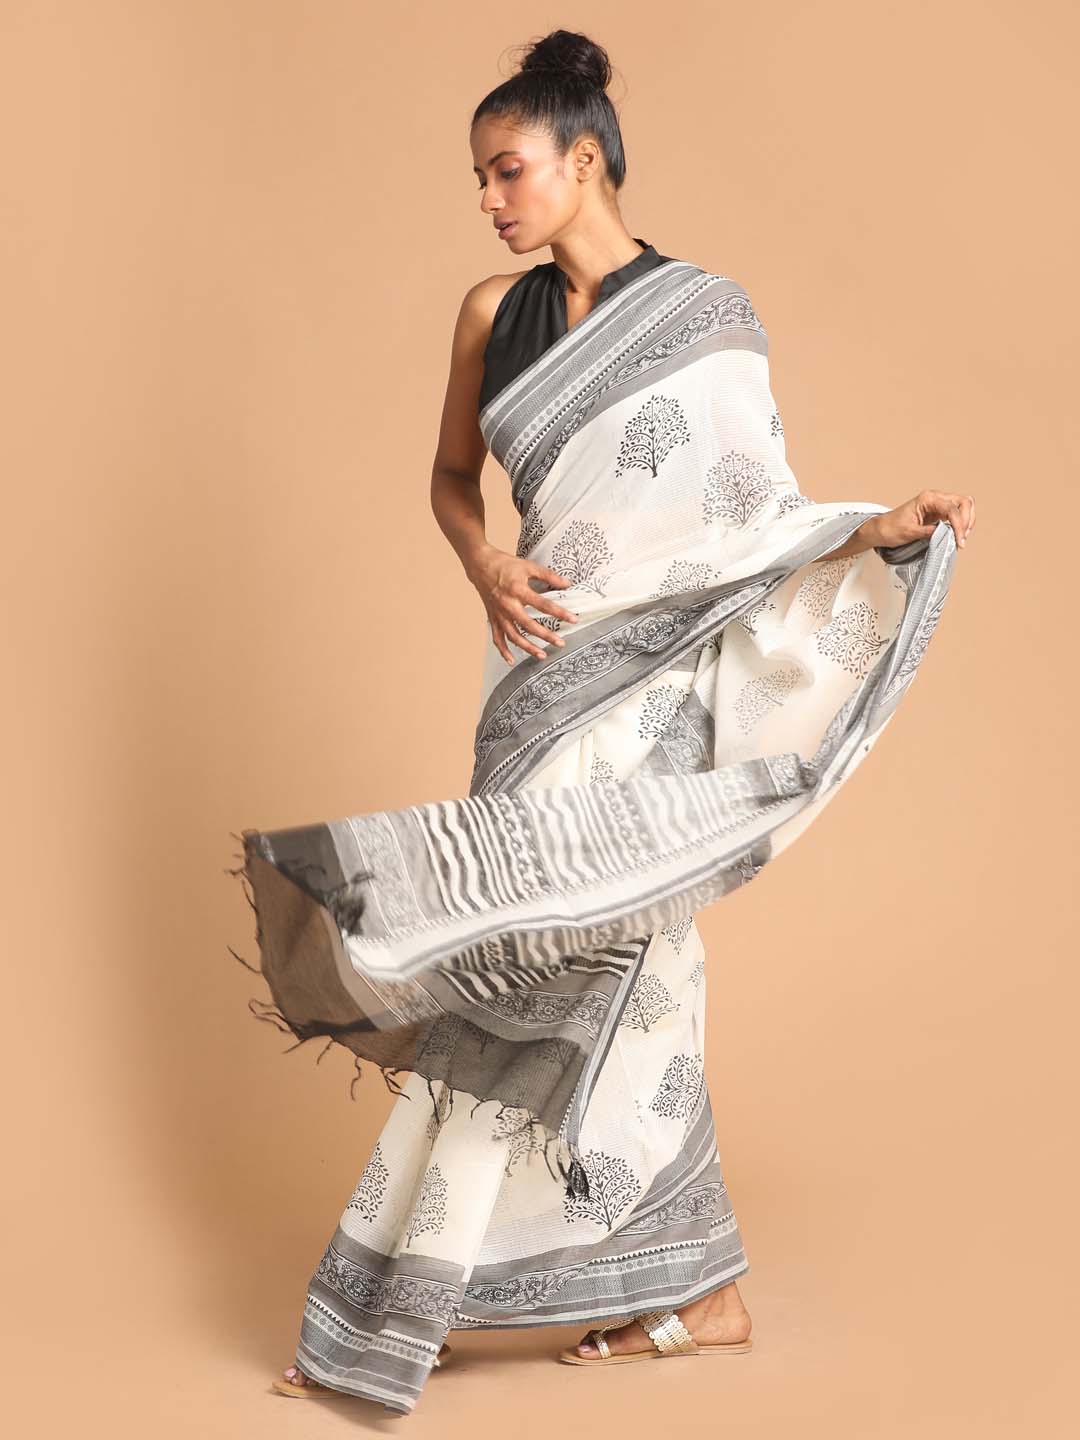 Indethnic Printed Pure Cotton Saree in Black - View 2